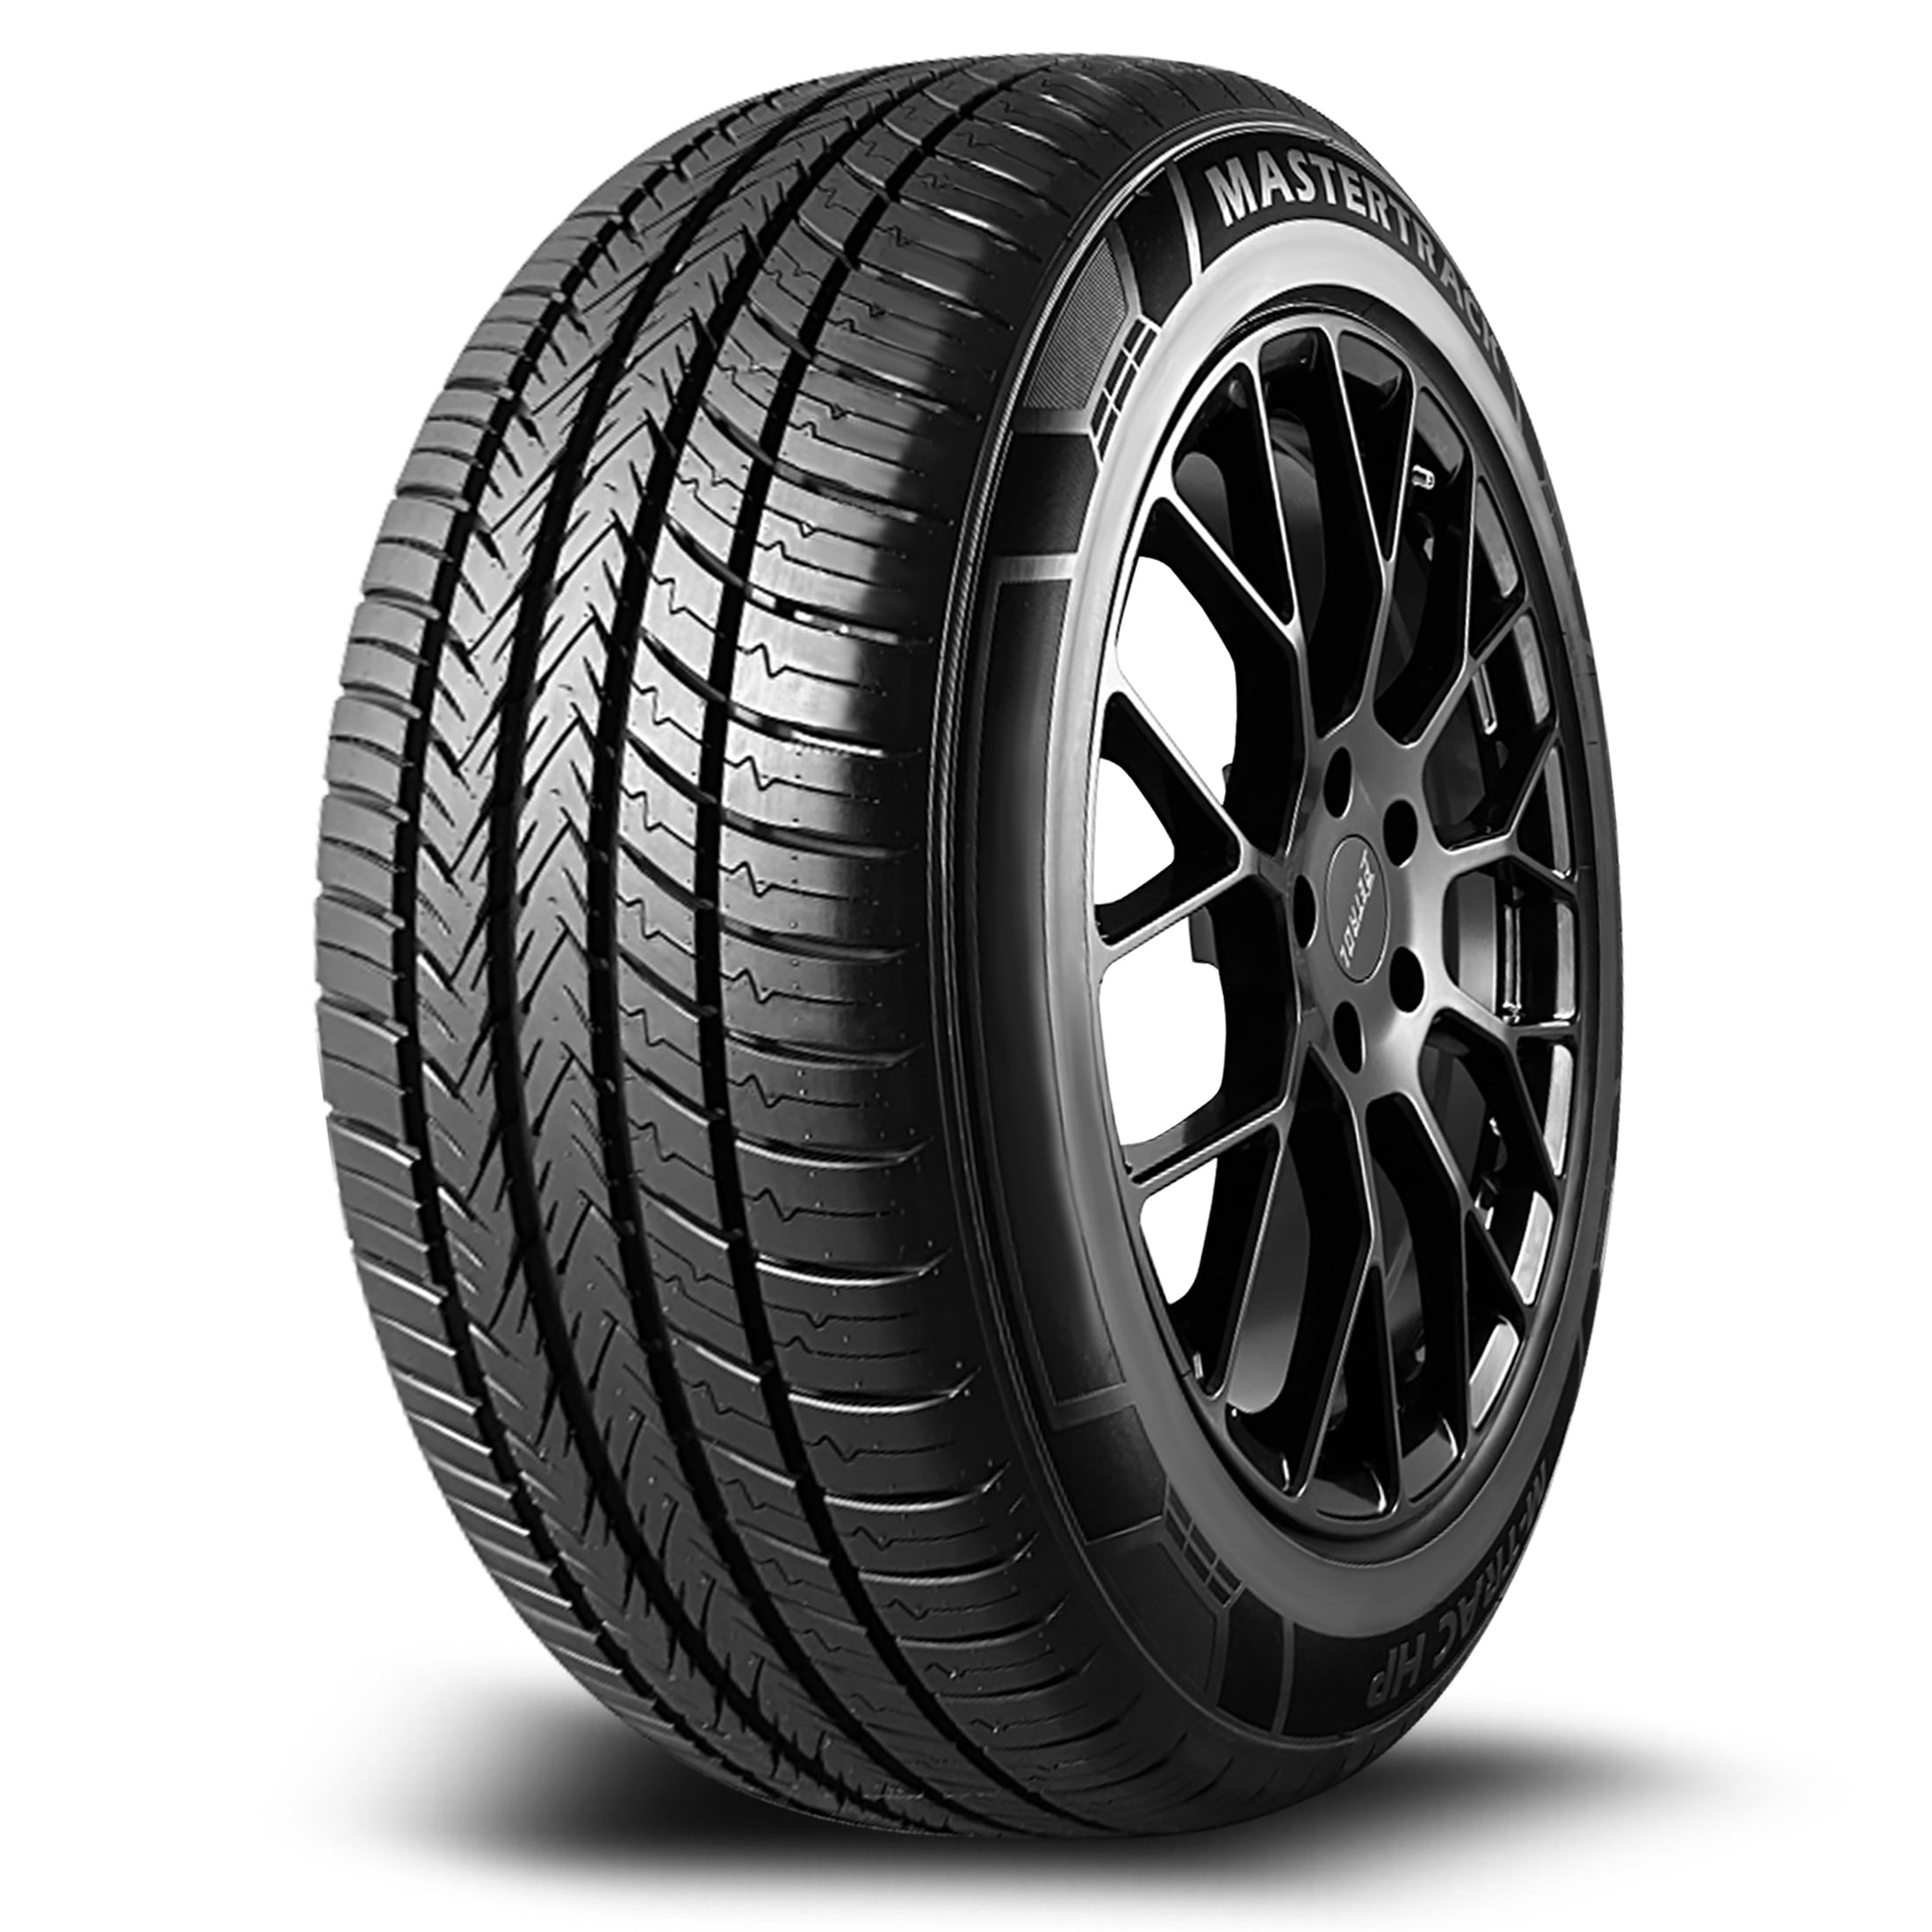 Mastertrack M-TRAC HP 235/50ZR18 97W High Performance All Season Passenger  Tire 235/50/18 (Tire Only)